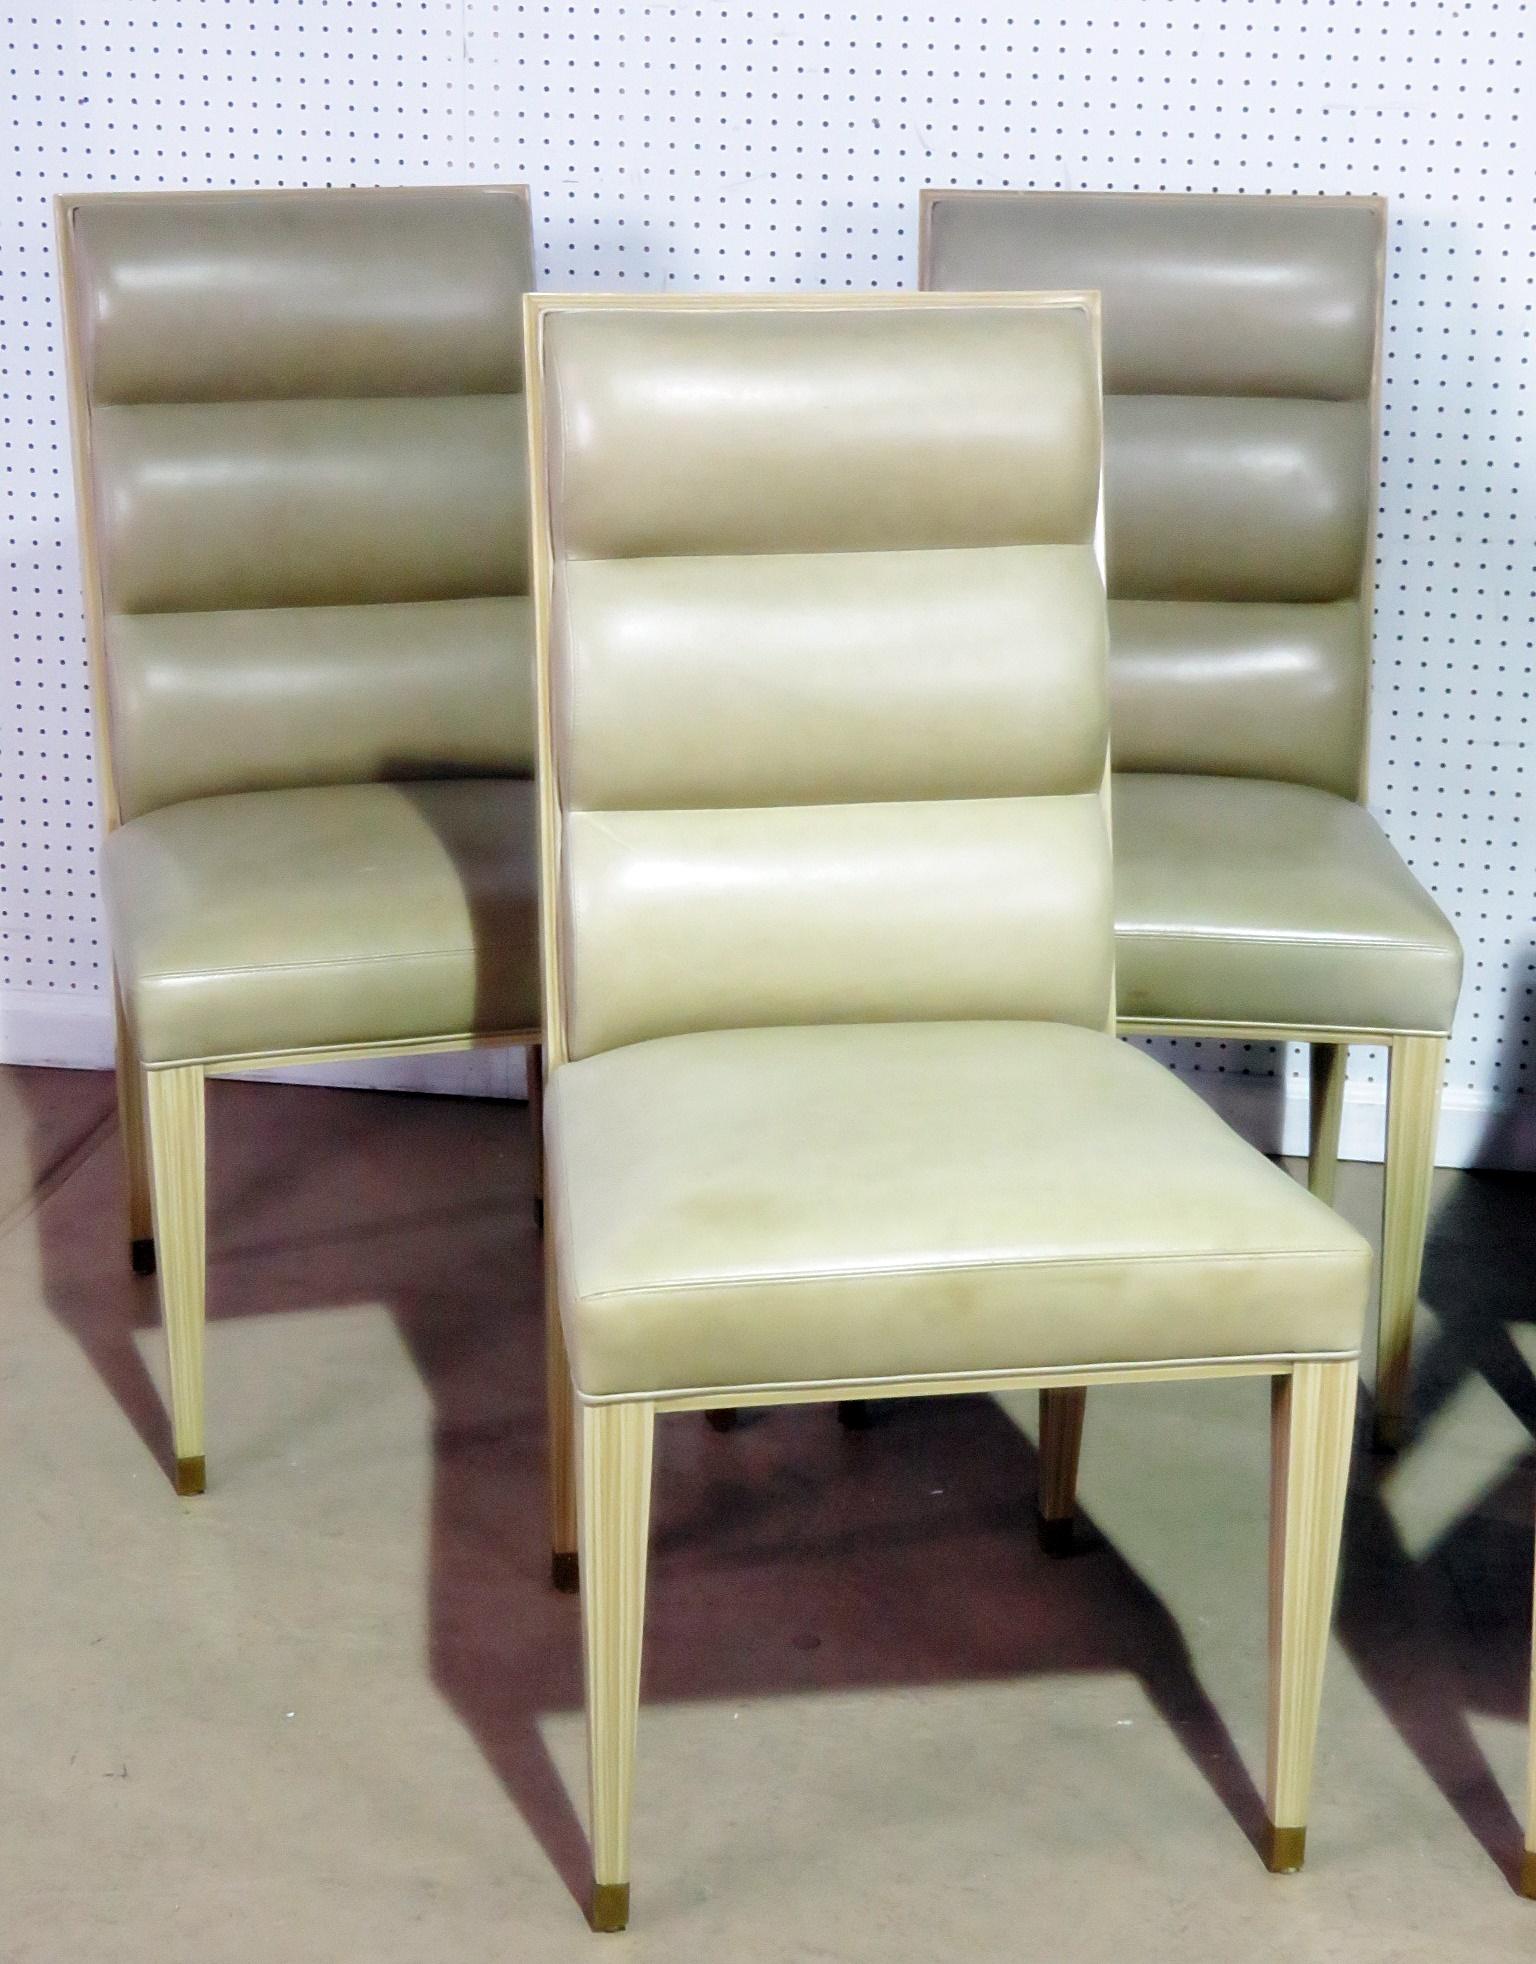 Set of six Mid-Century Modern dining chairs with leather upholstery. Two armchairs measure 29